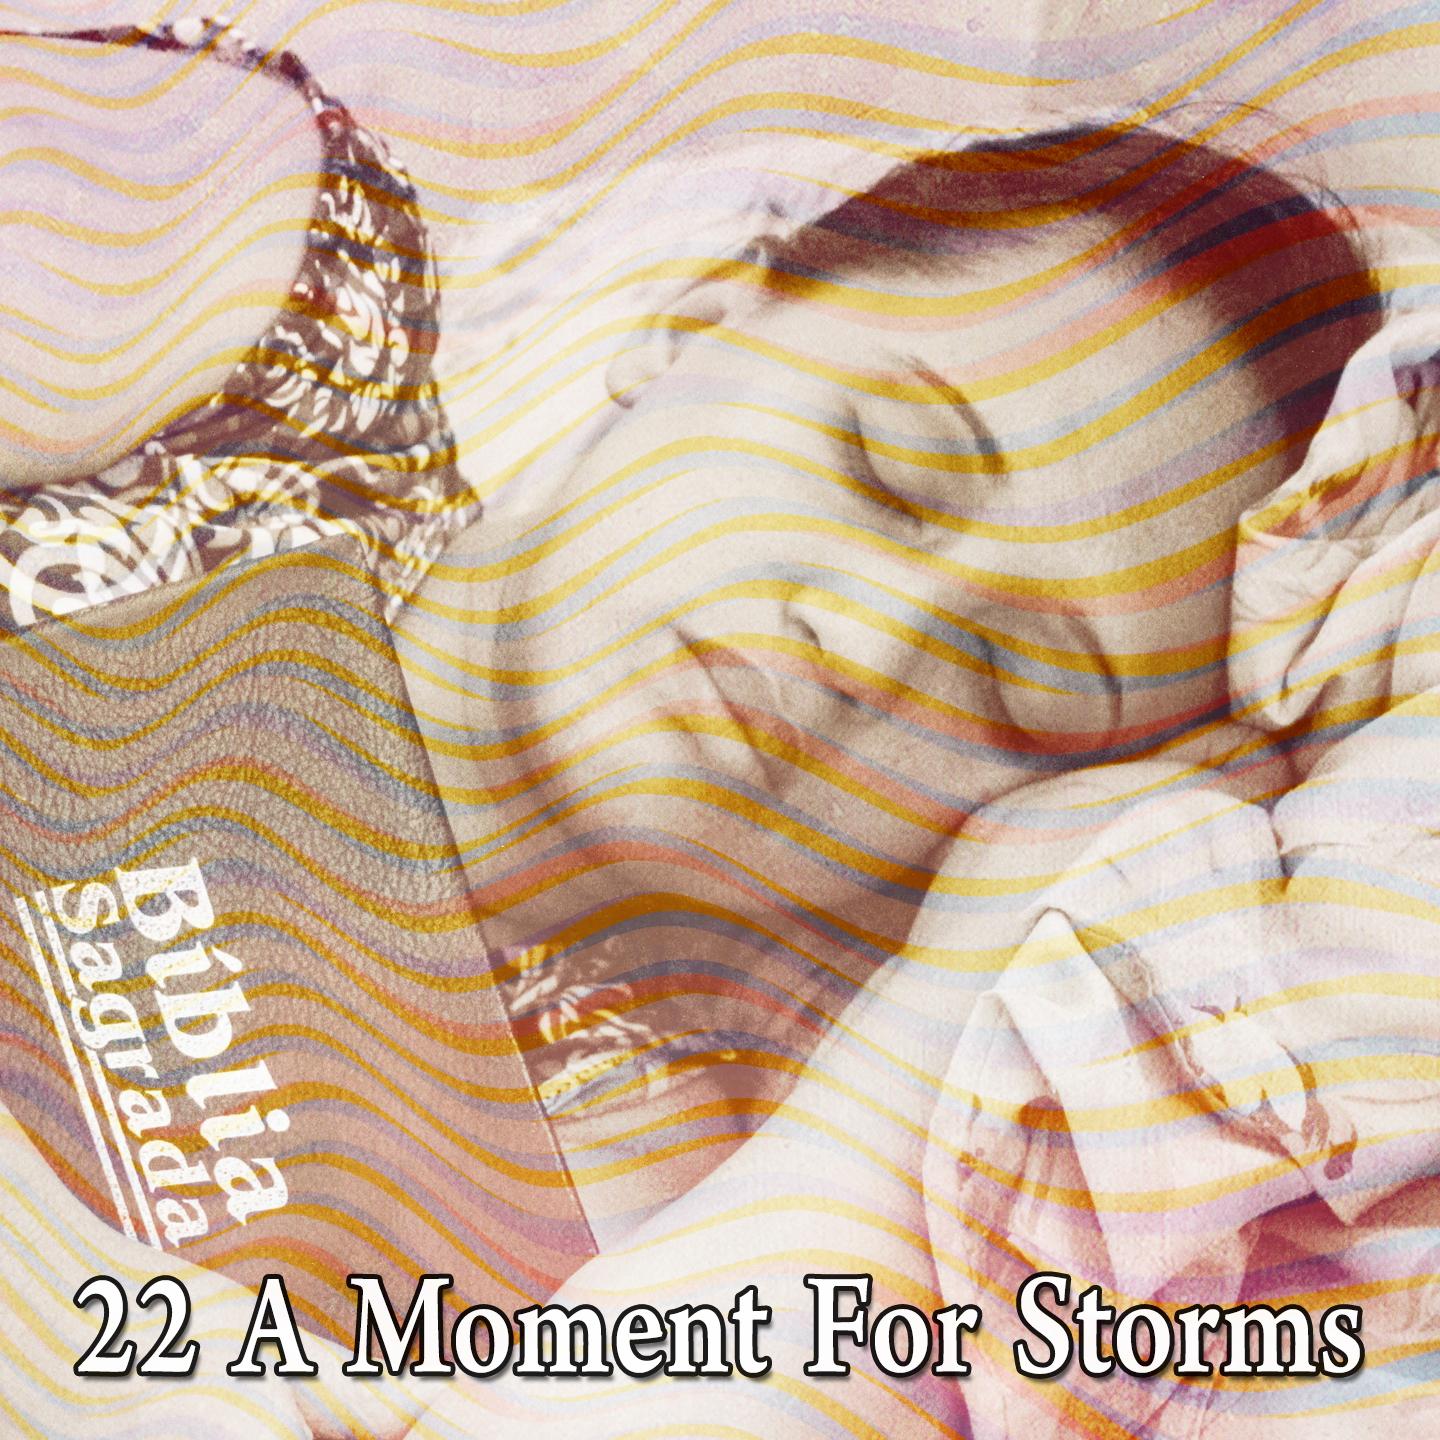 22 A Moment for Storms